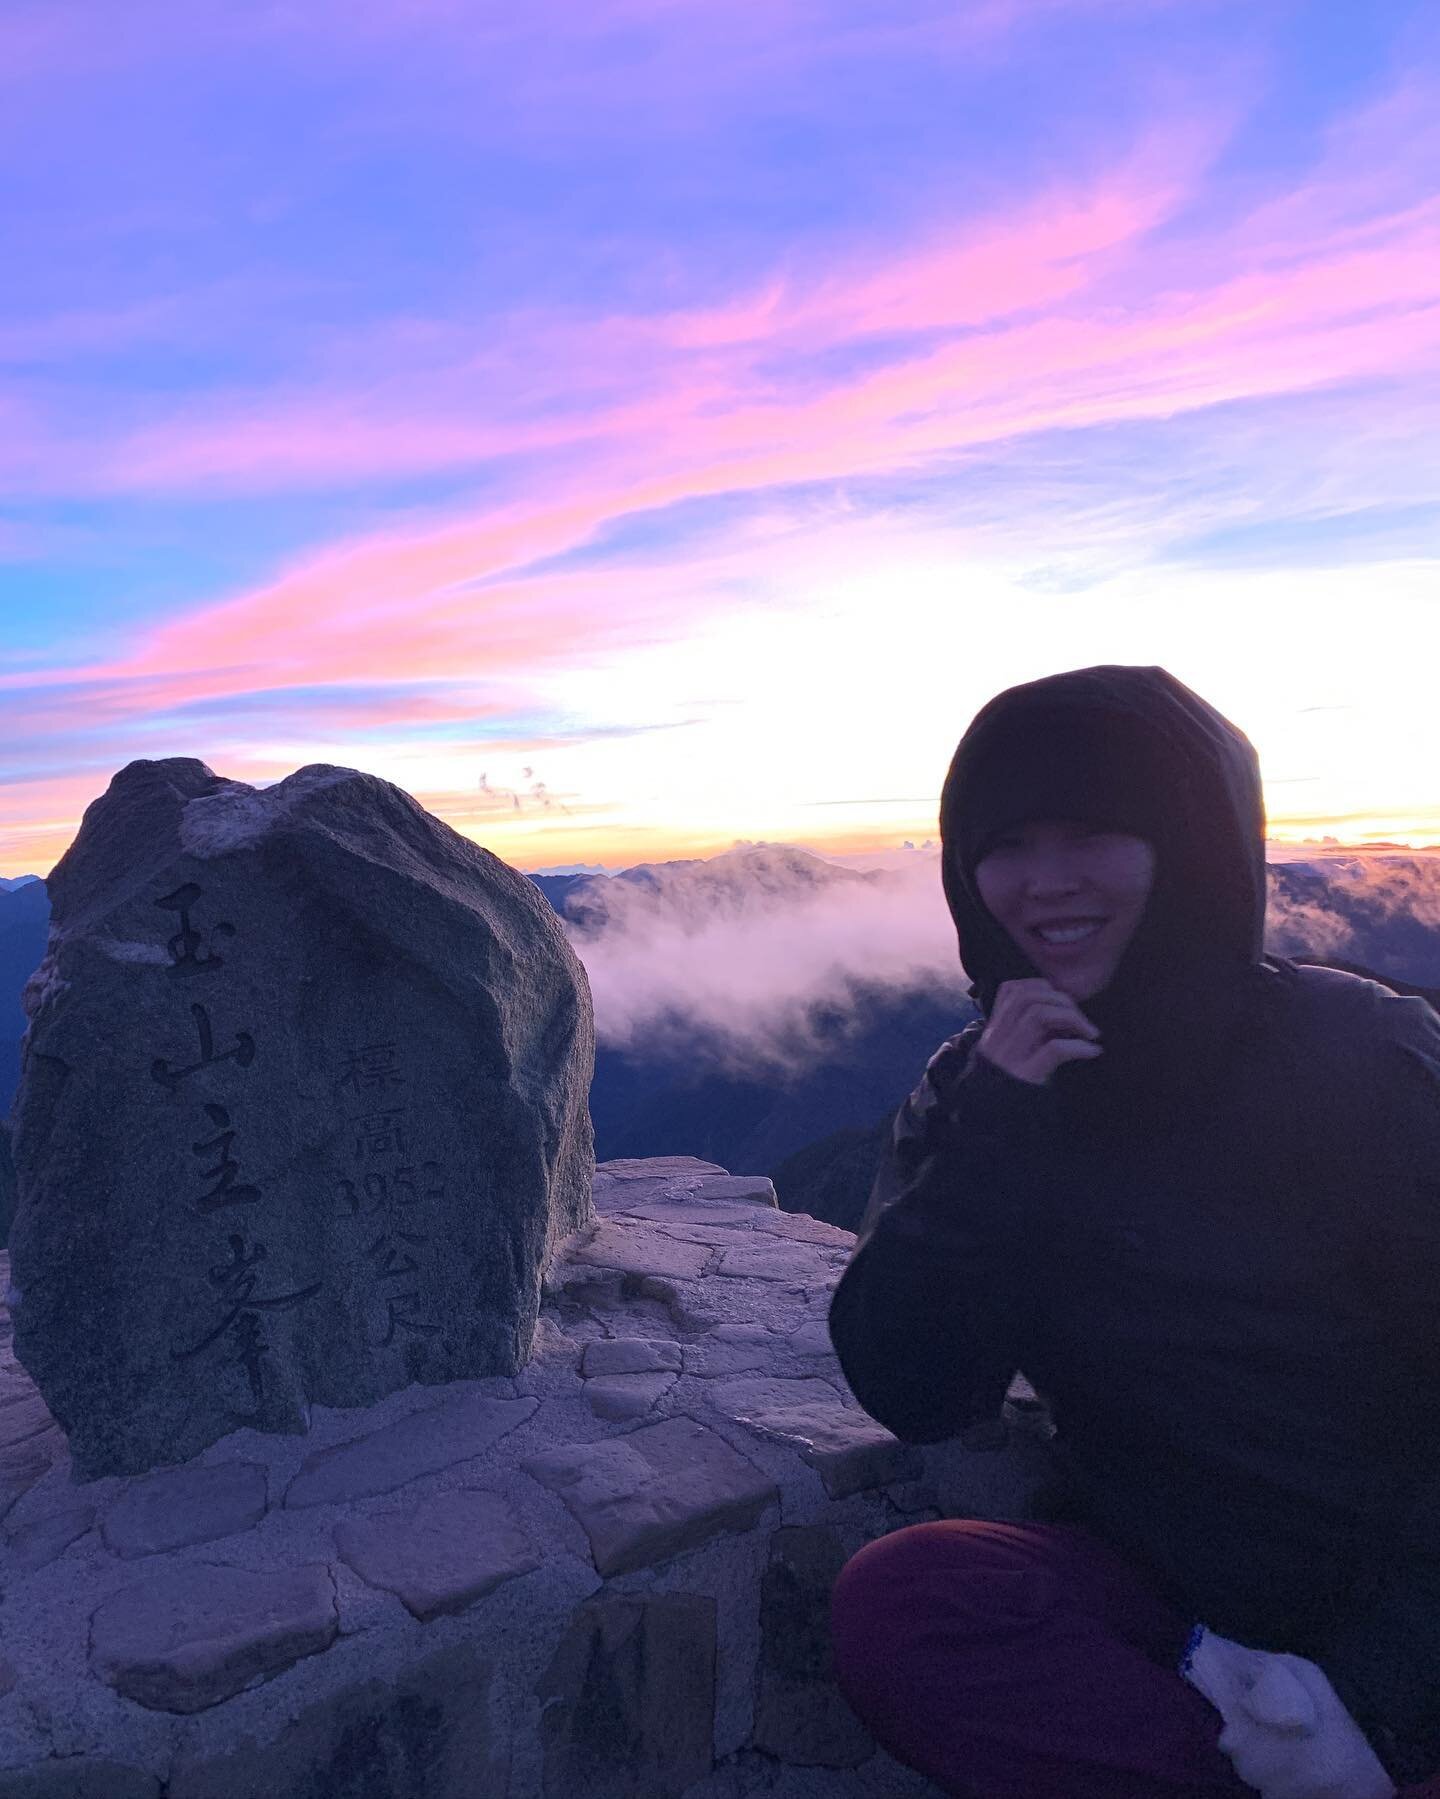 In 2018, I hiked Snow Mountain 雪山, Taiwan&rsquo;s second tallest mountain with the goal of eventually climbing Jade Mountain 玉山, Taiwan&rsquo;s tallest at 3952m (12,966 ft). After a pretty serious injury at the end of 2018, I wasn&rsquo;t sure if it 